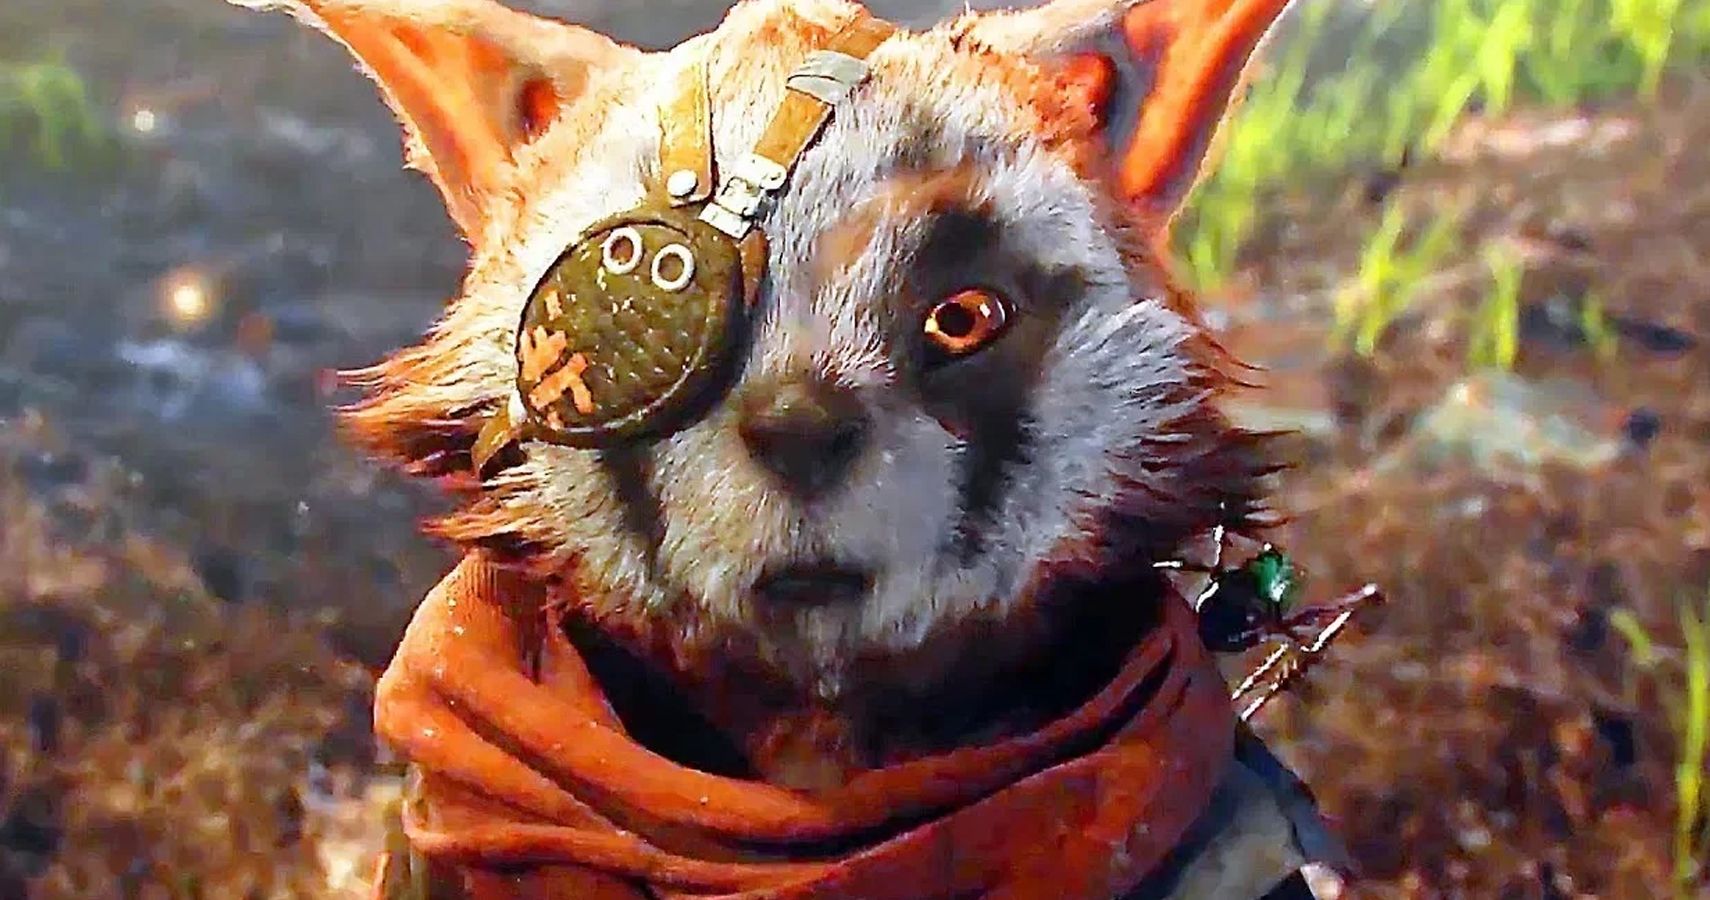 A shot from the game Biomutant, showing a racoon like player character